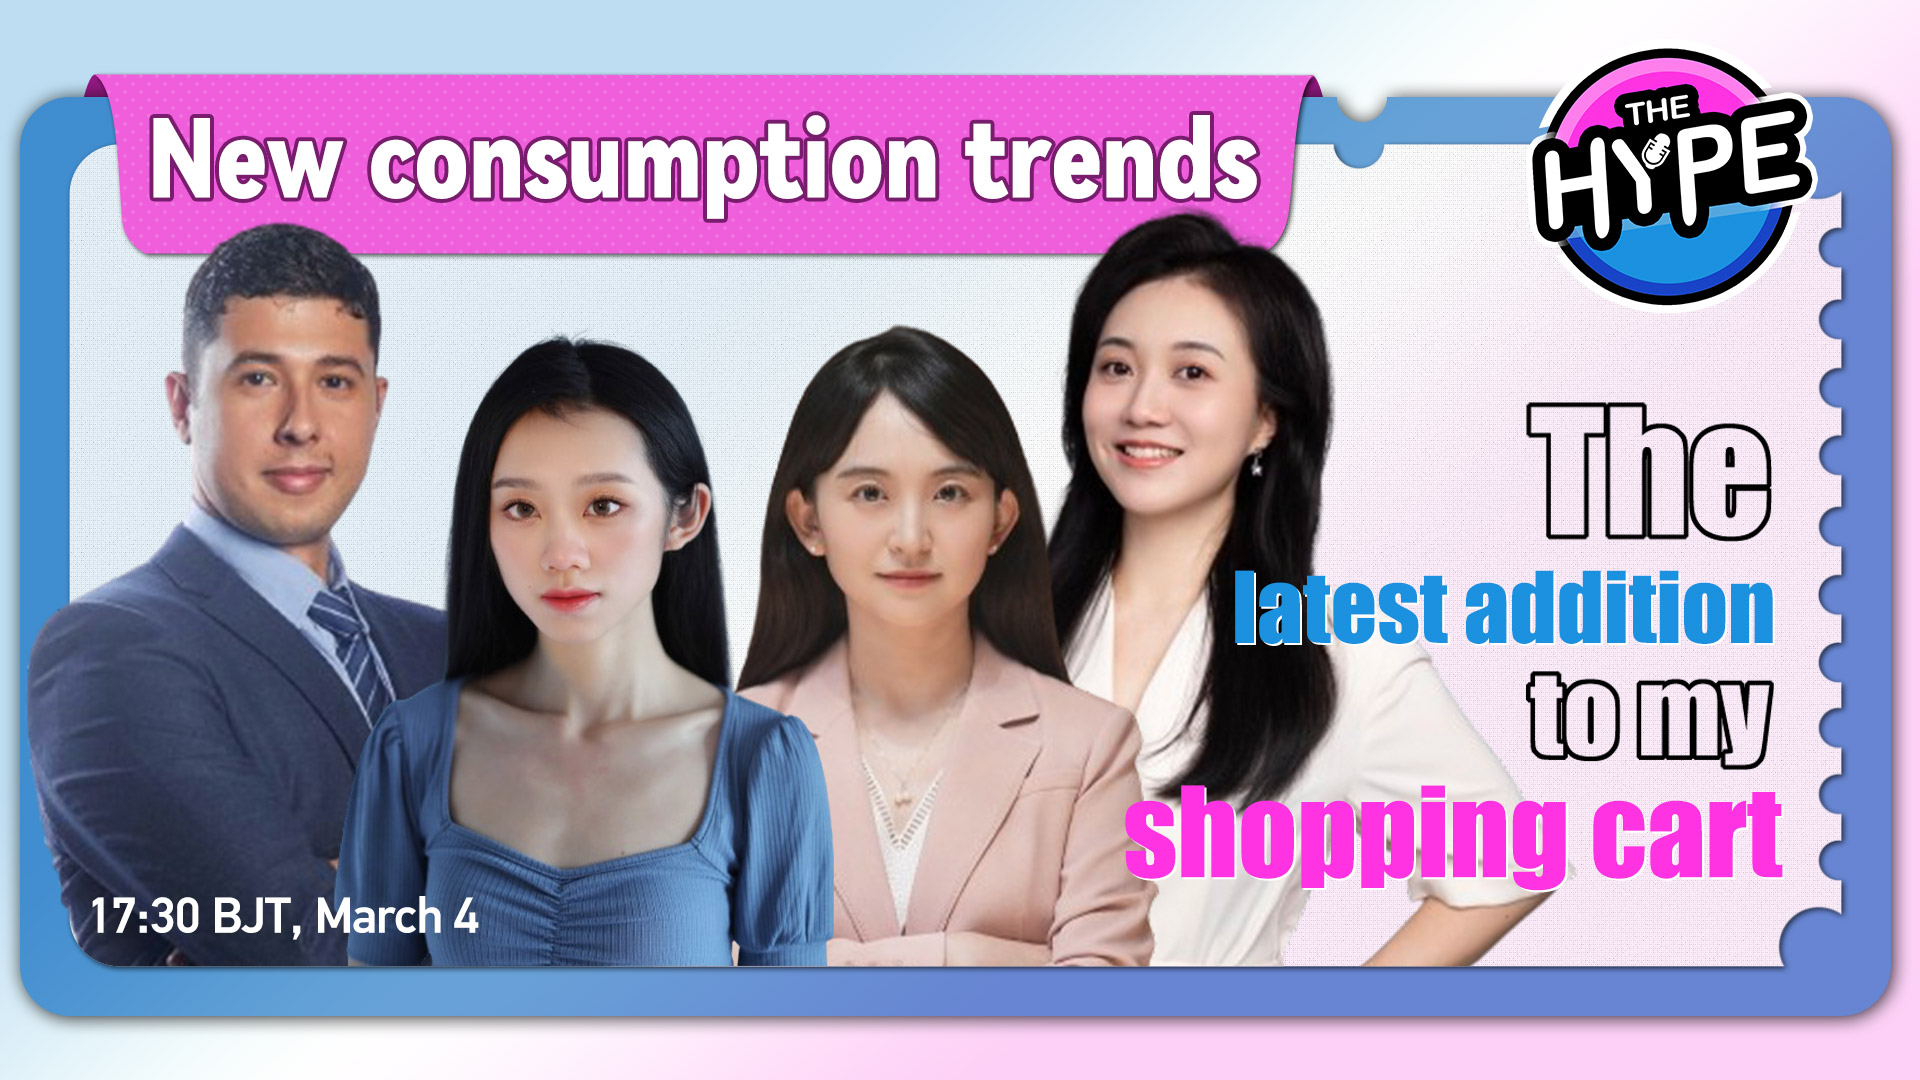 New consumption trends – The latest addition to my shopping cart